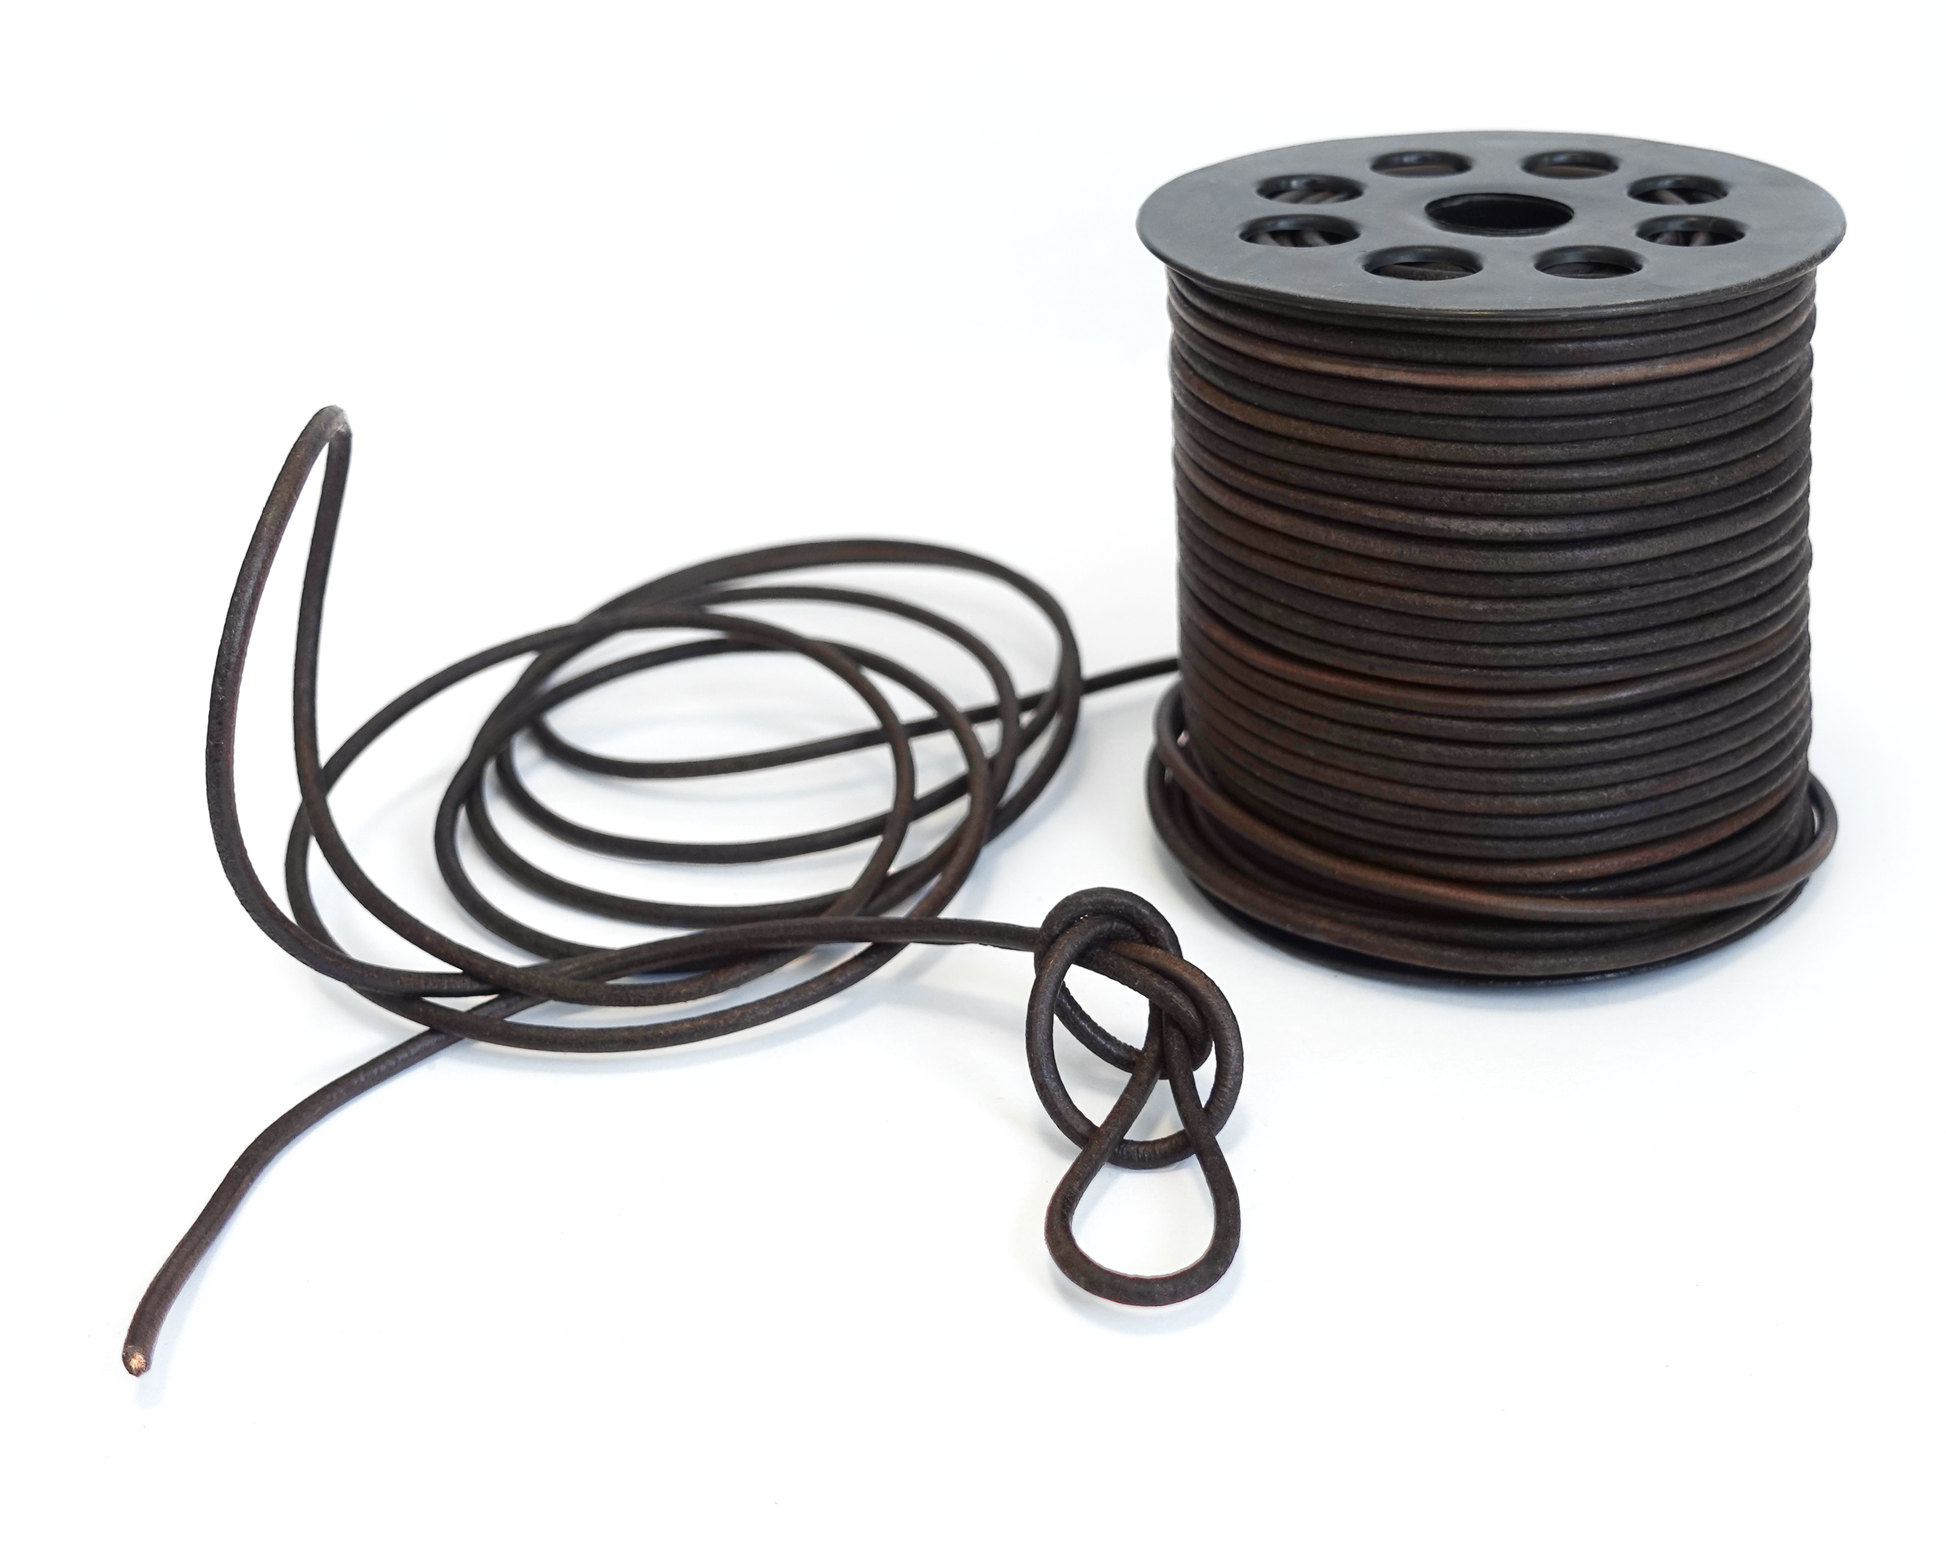 Leather Thread, 3m of Thread, 3mm Thread, Brown Thread, Brown Cord, Leather  Rope, Leather Cord, Ø3mm Thread, Brown Lace, Black, Red,  C65,202,224,230-232 